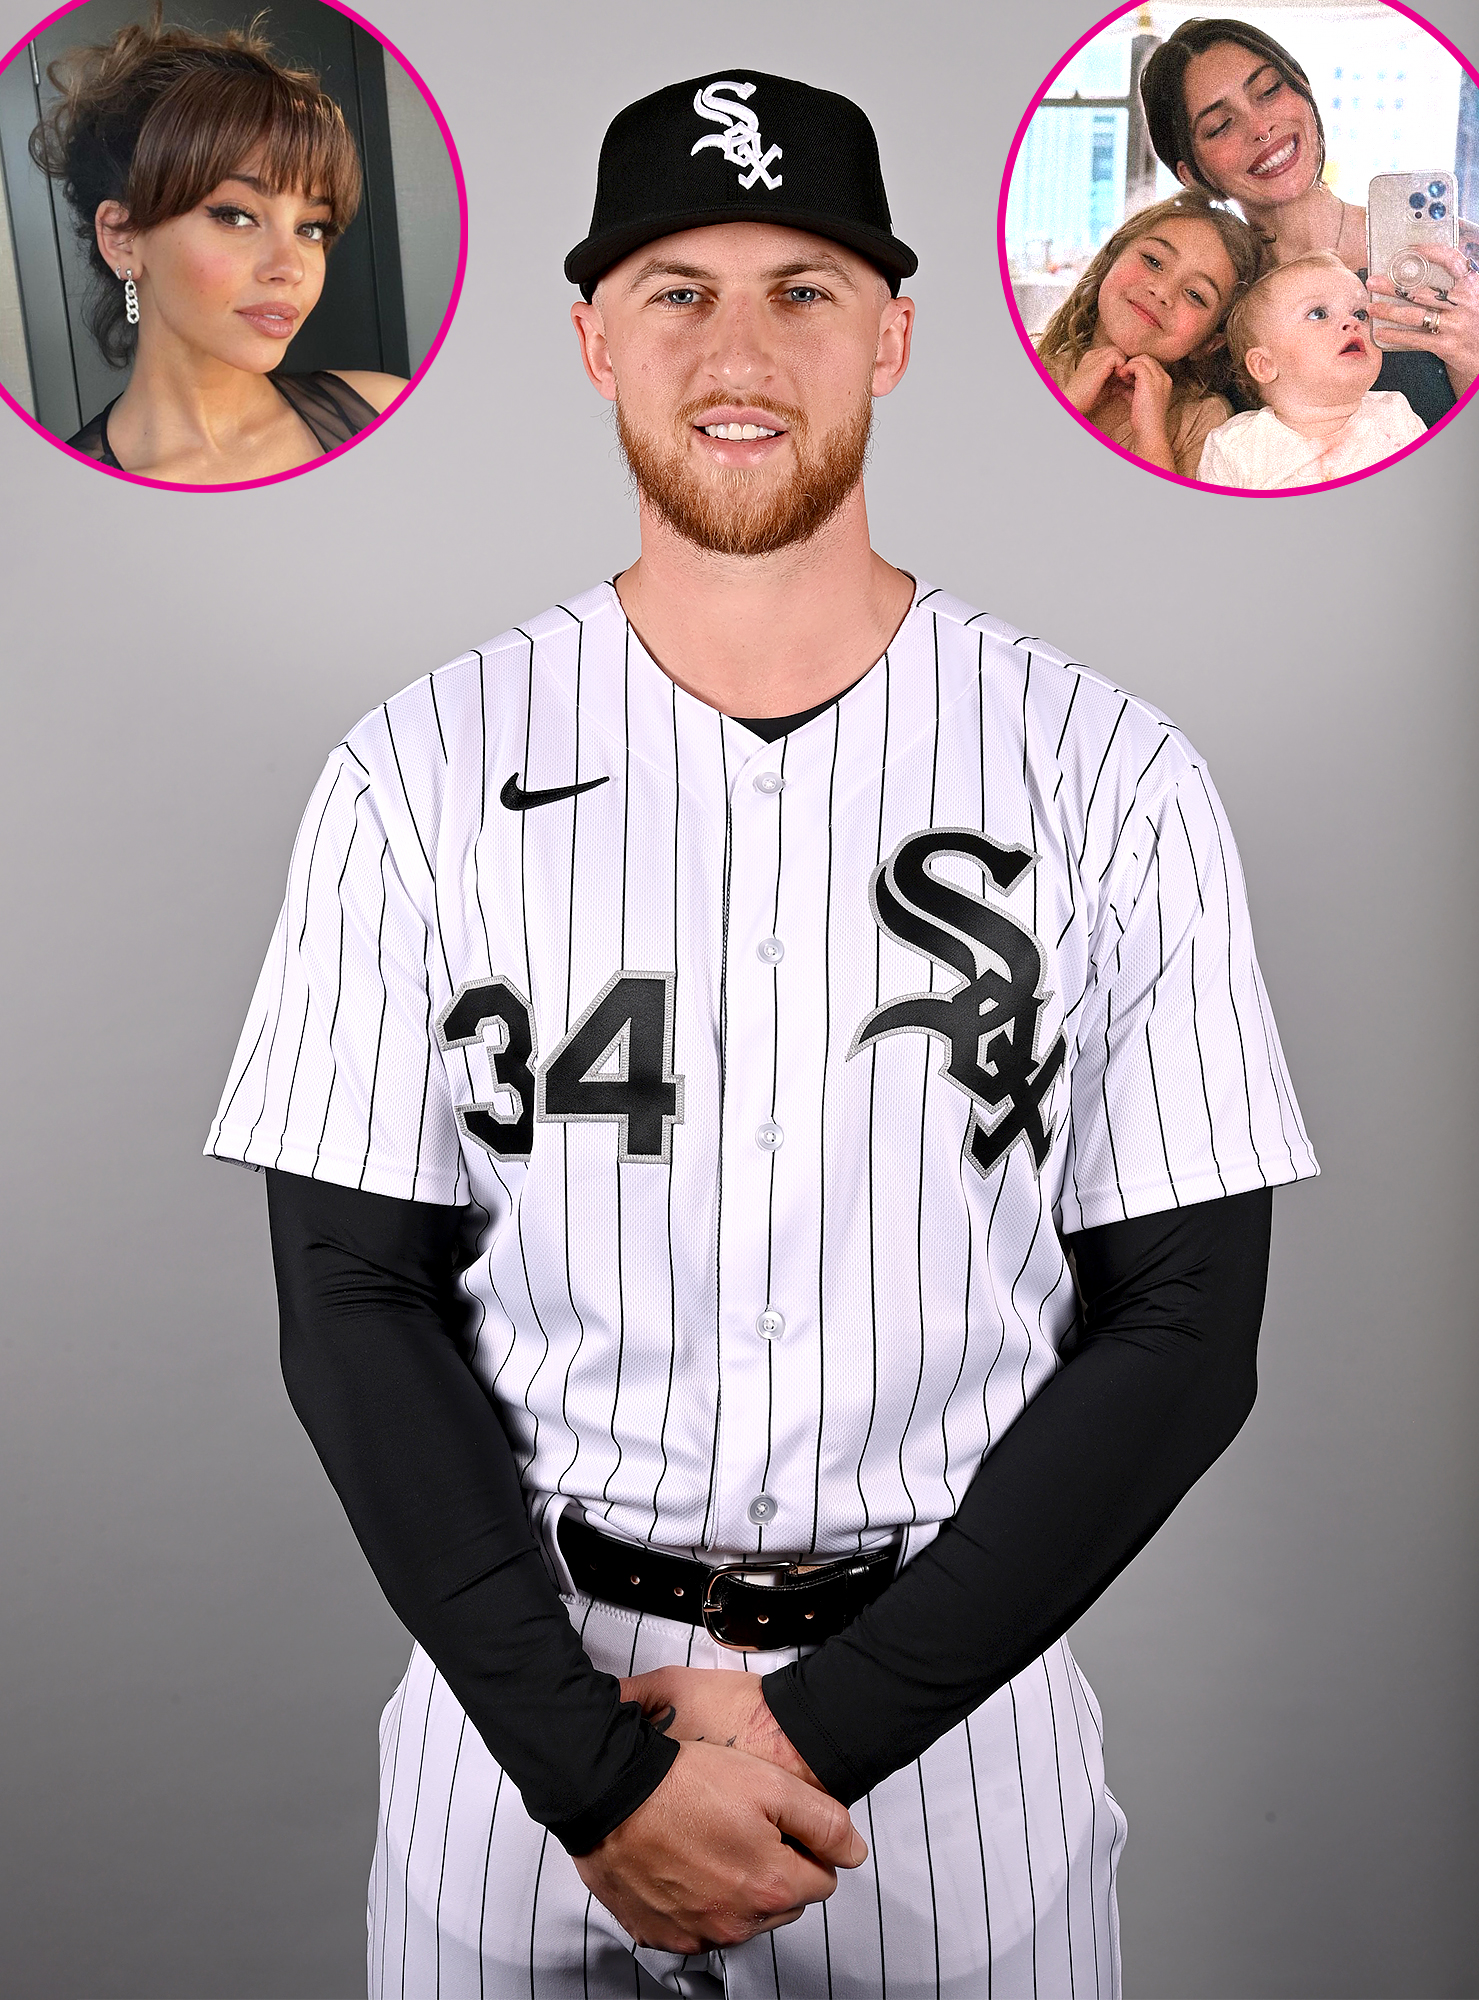 You Should Be Stoked For Michael Kopech